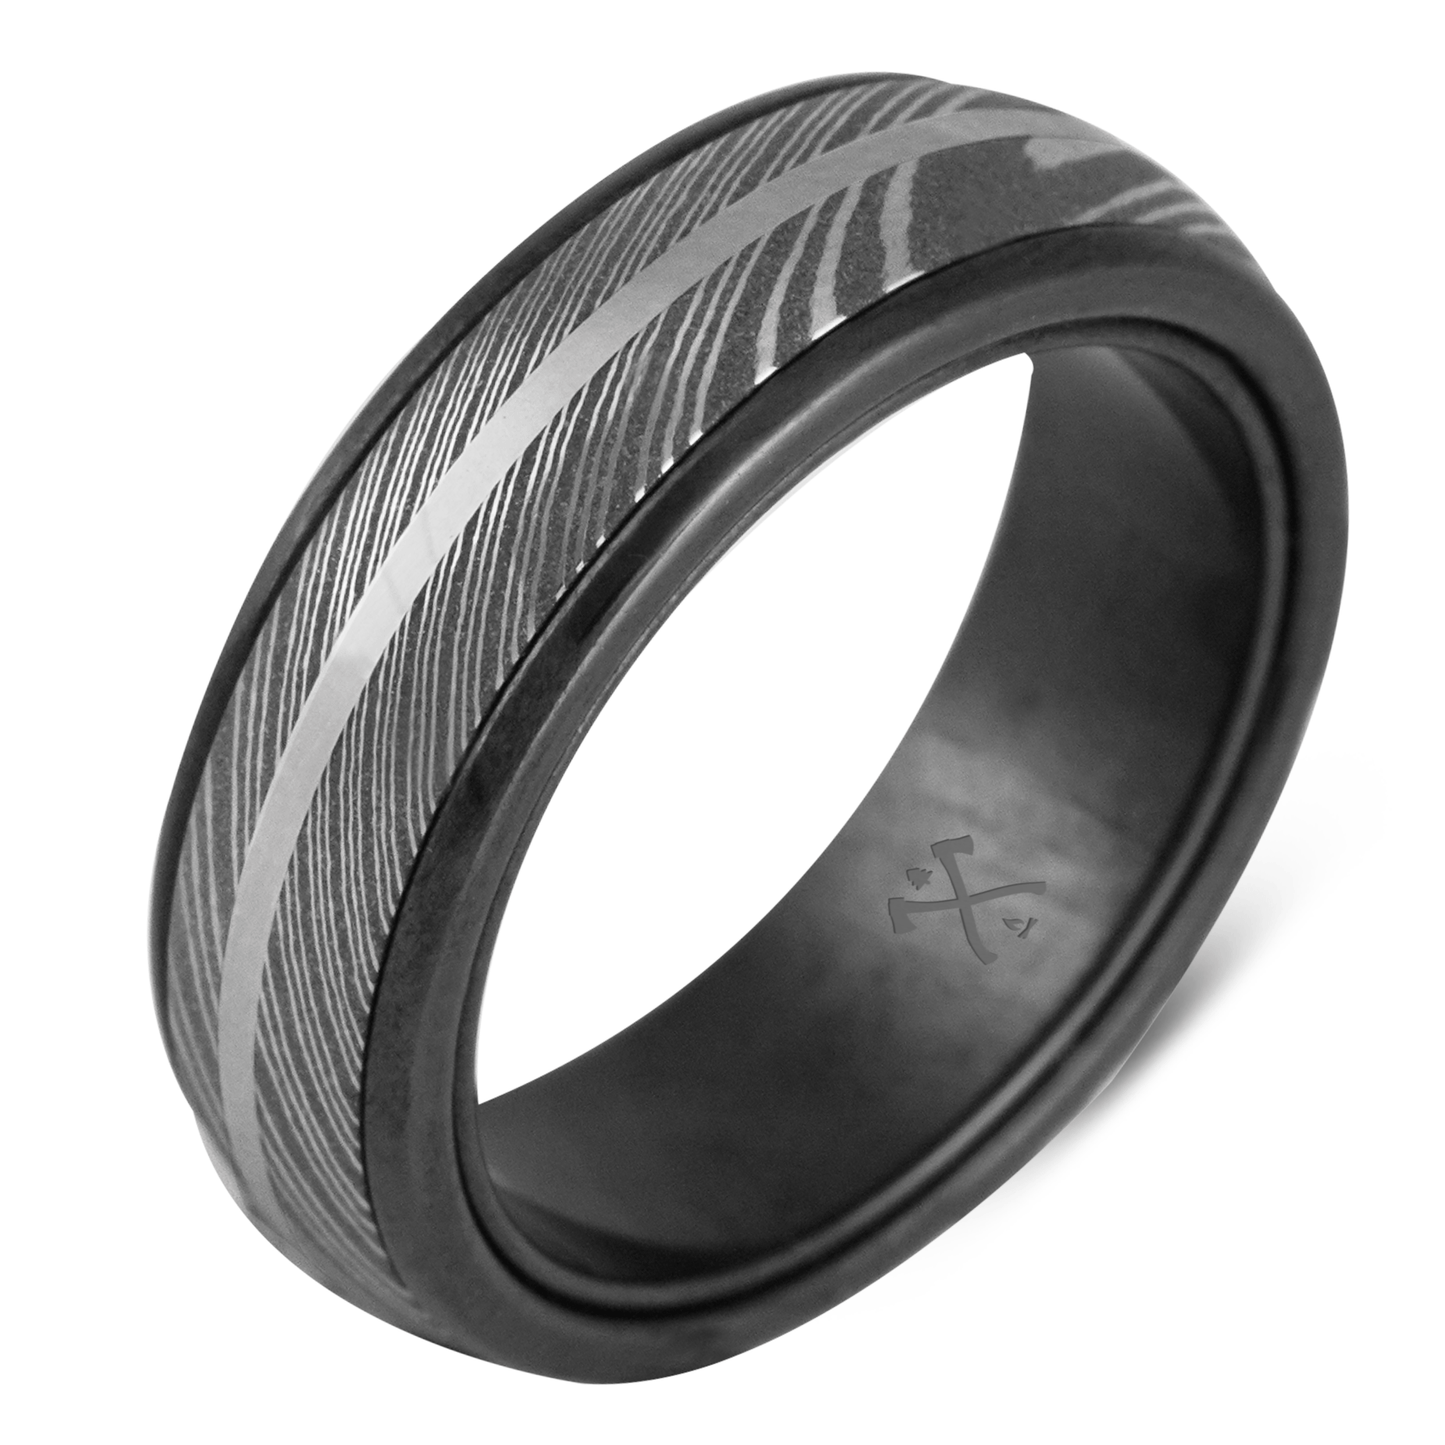 The Socrates - Men's Wedding Rings - Manly Bands